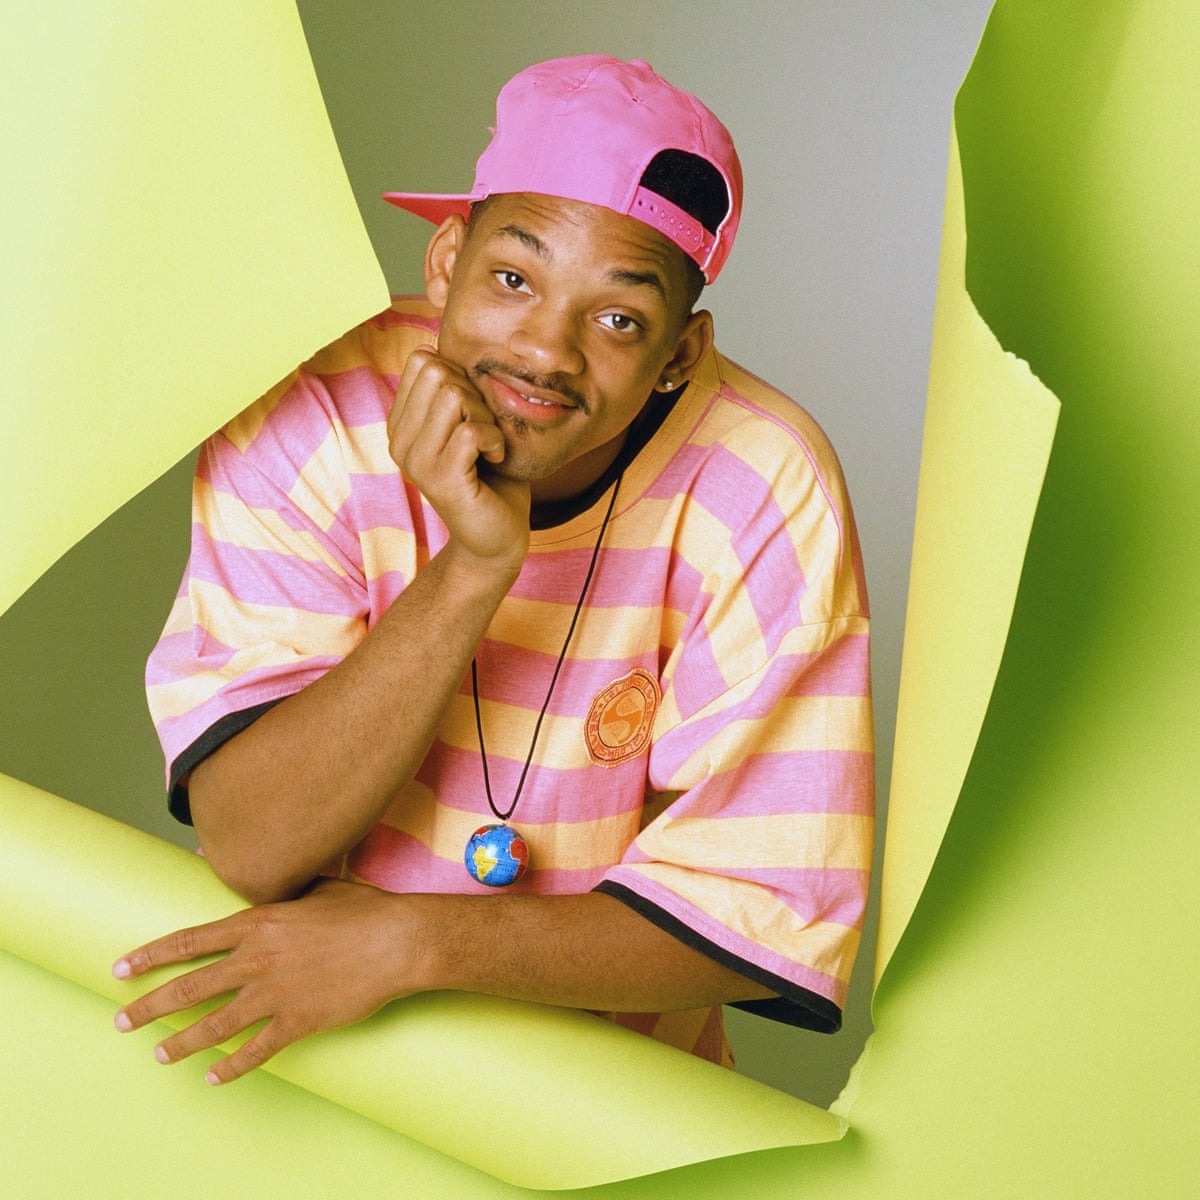 Who created the Fresh Prince of Bel Air?